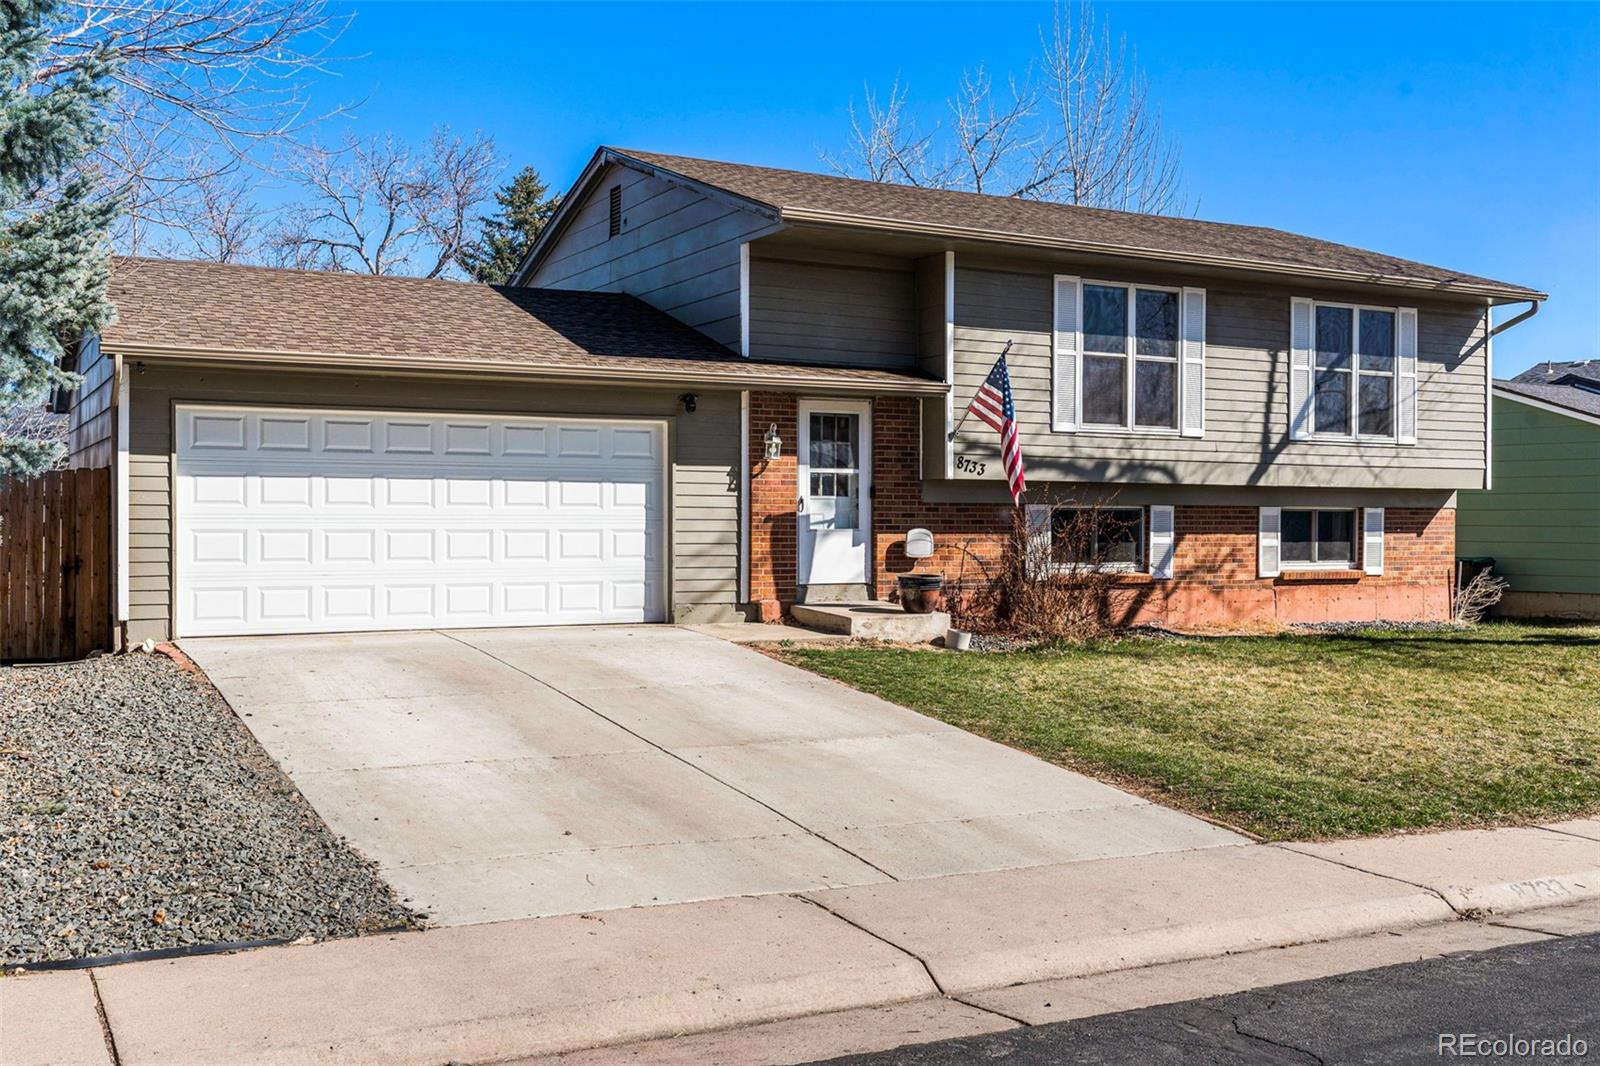 Report Image for 8733 W Floyd Avenue,Lakewood, Colorado